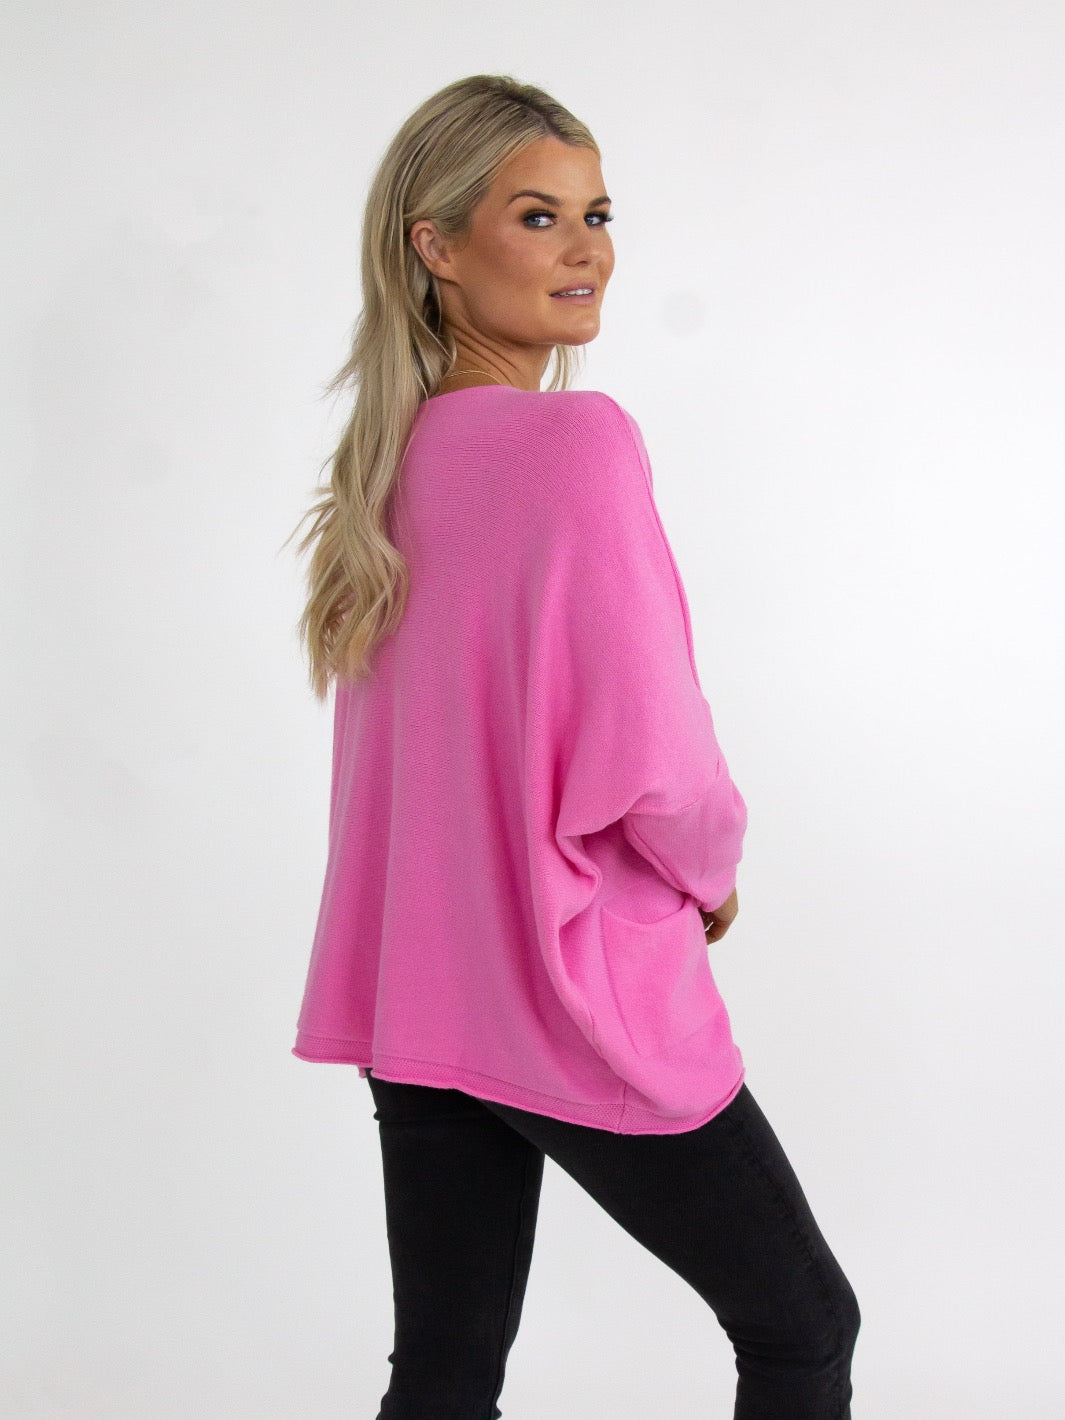 Kate & Pippa Roma Knit Jumper In Pink-Nicola Ross